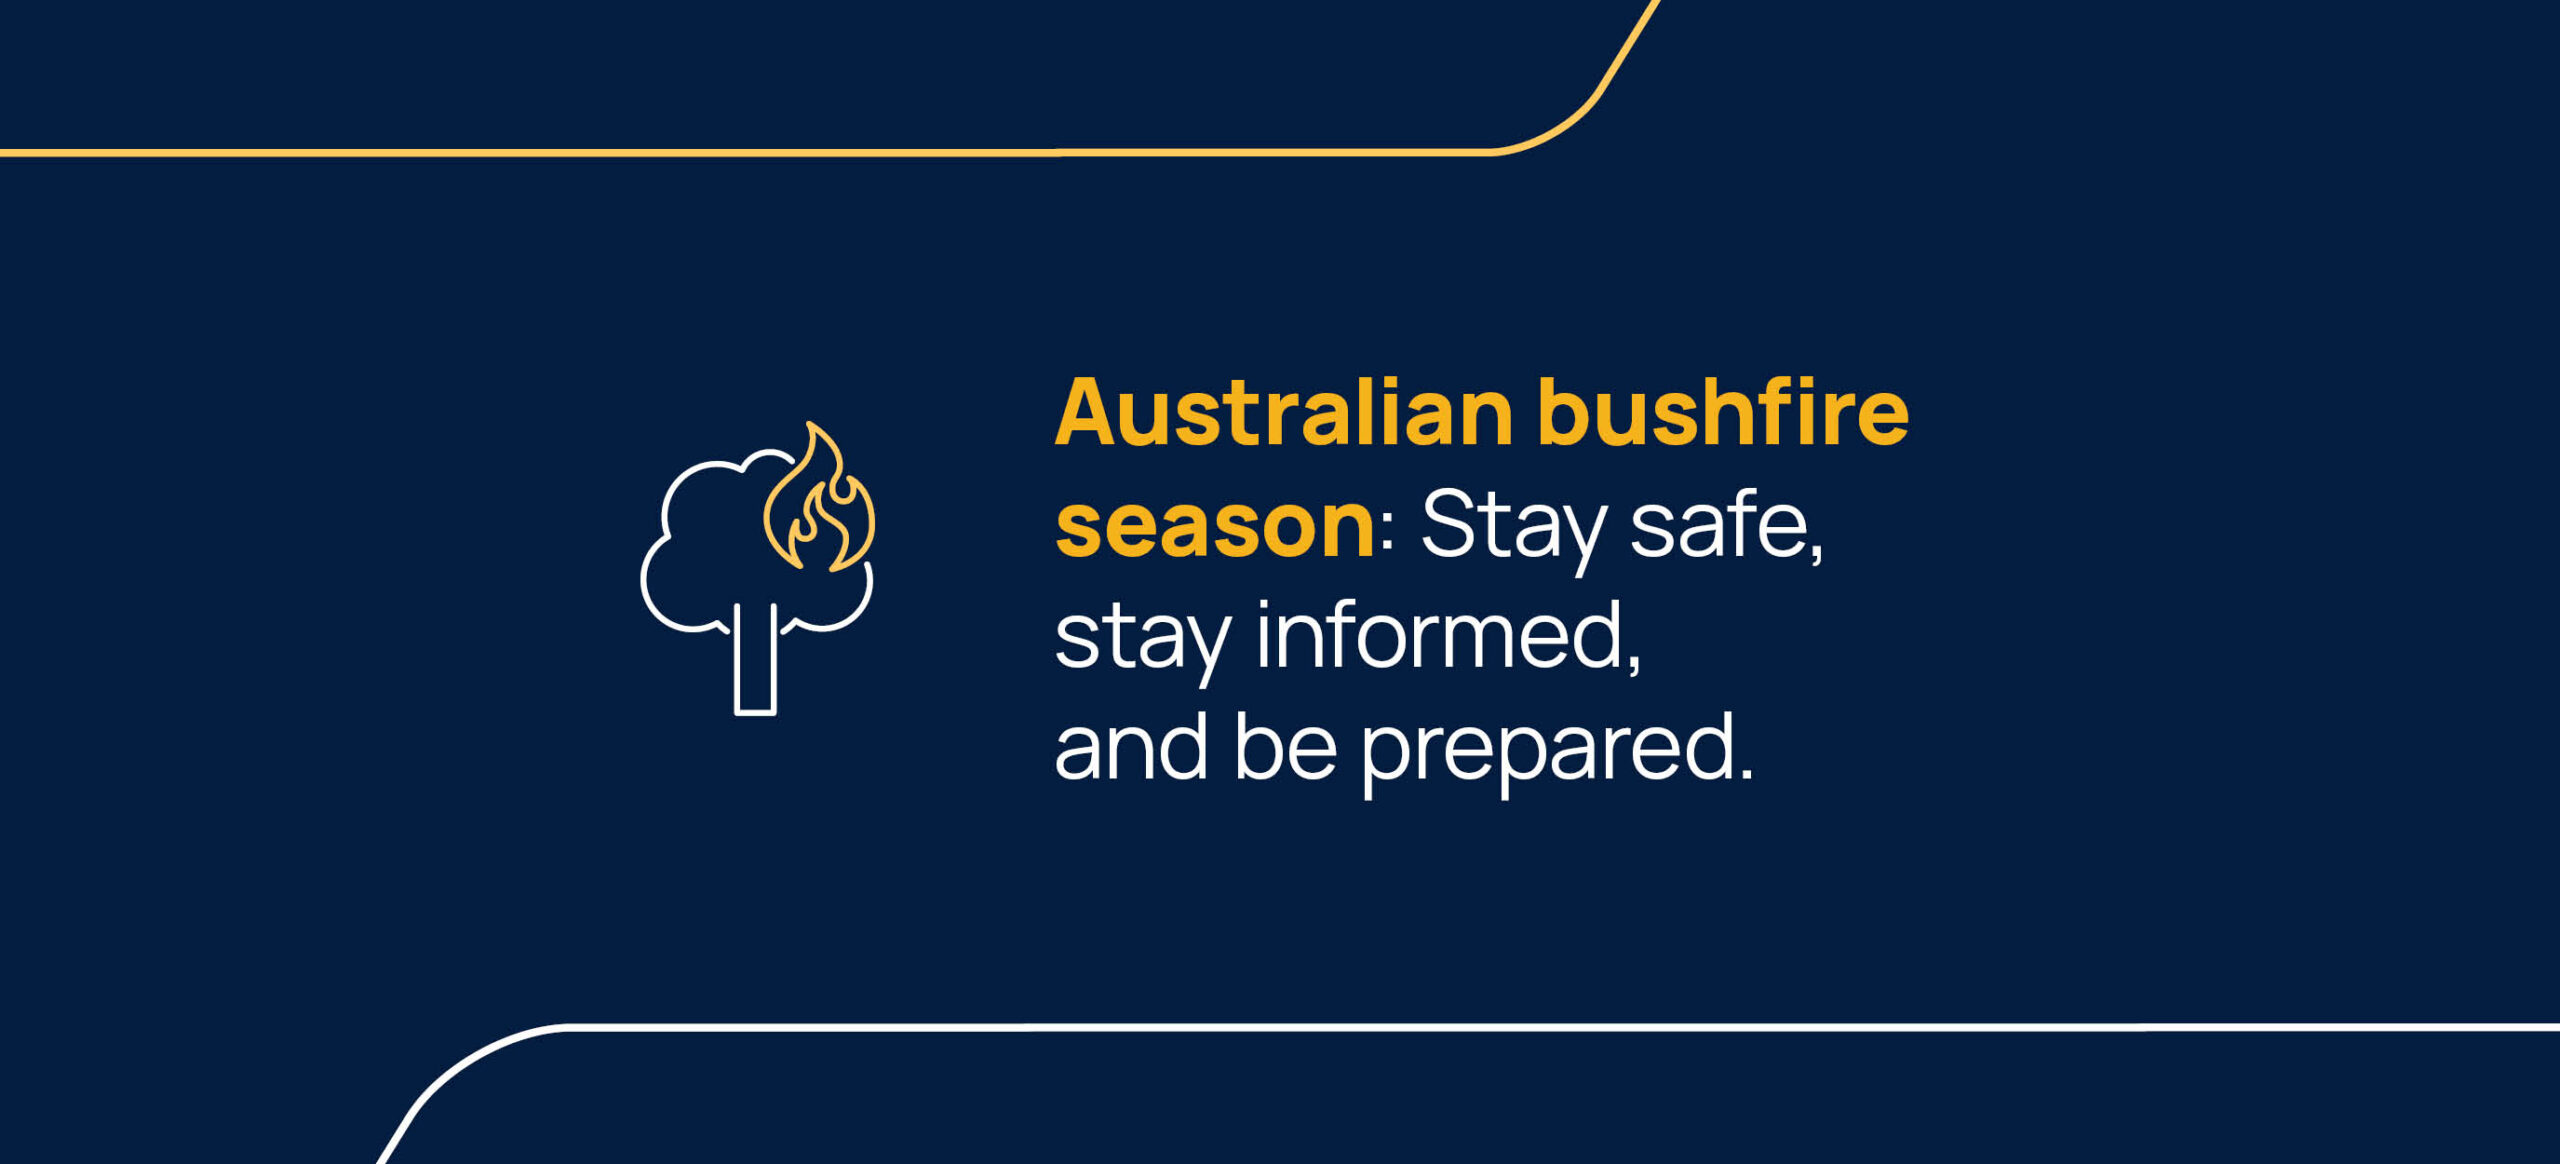 Stay safe, stay informed, and be prepared.